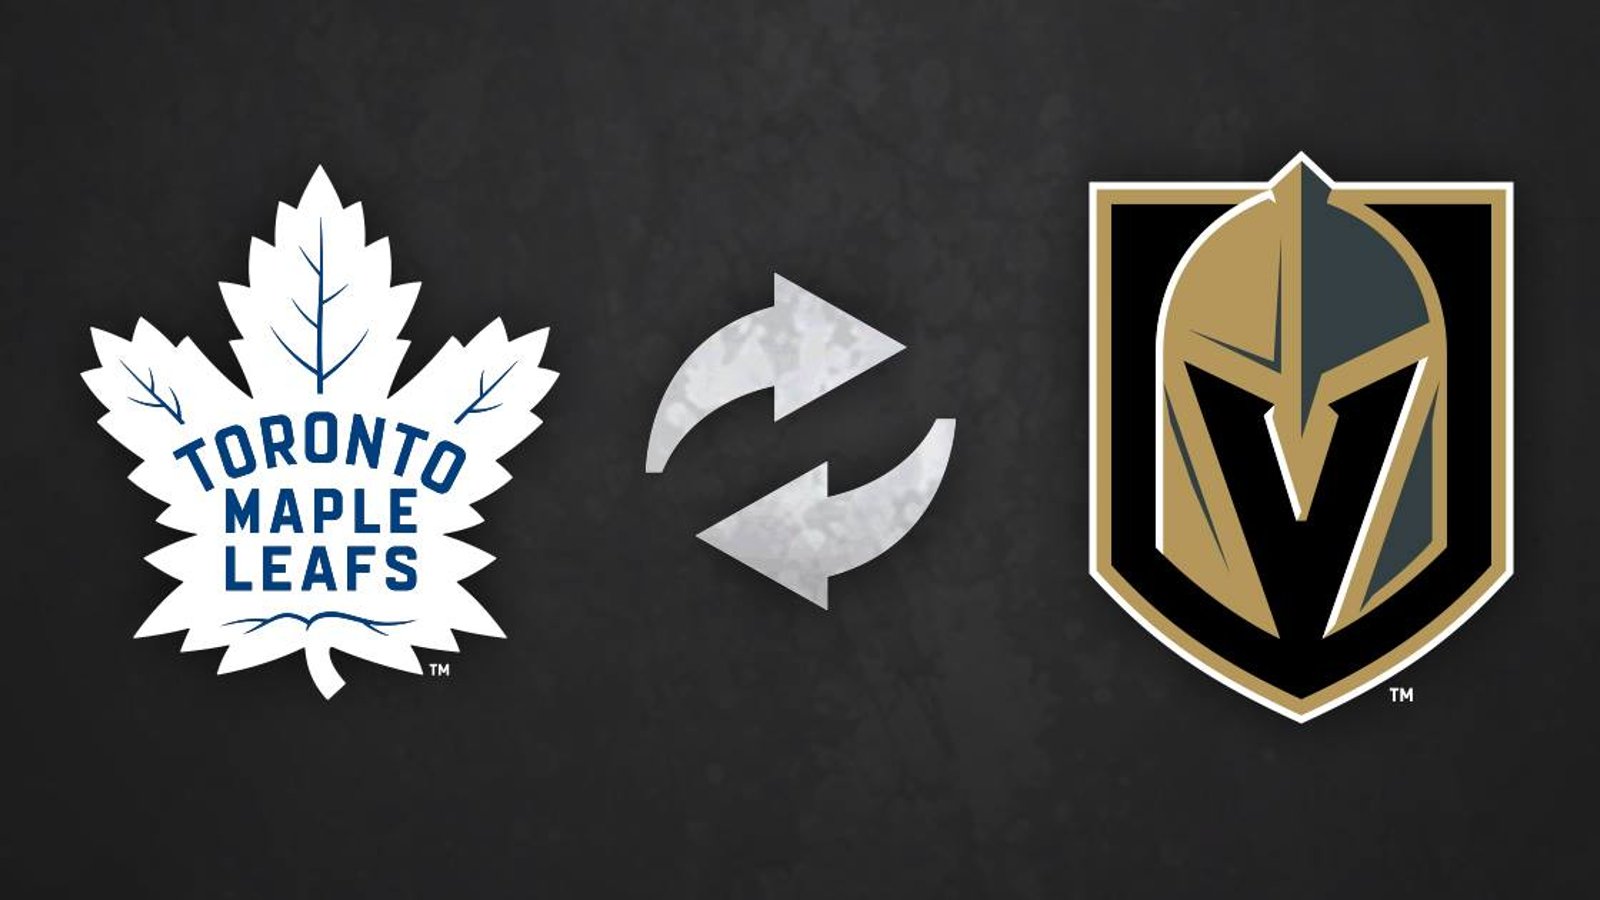 Breaking: The Leafs and Golden Knights have made a trade!